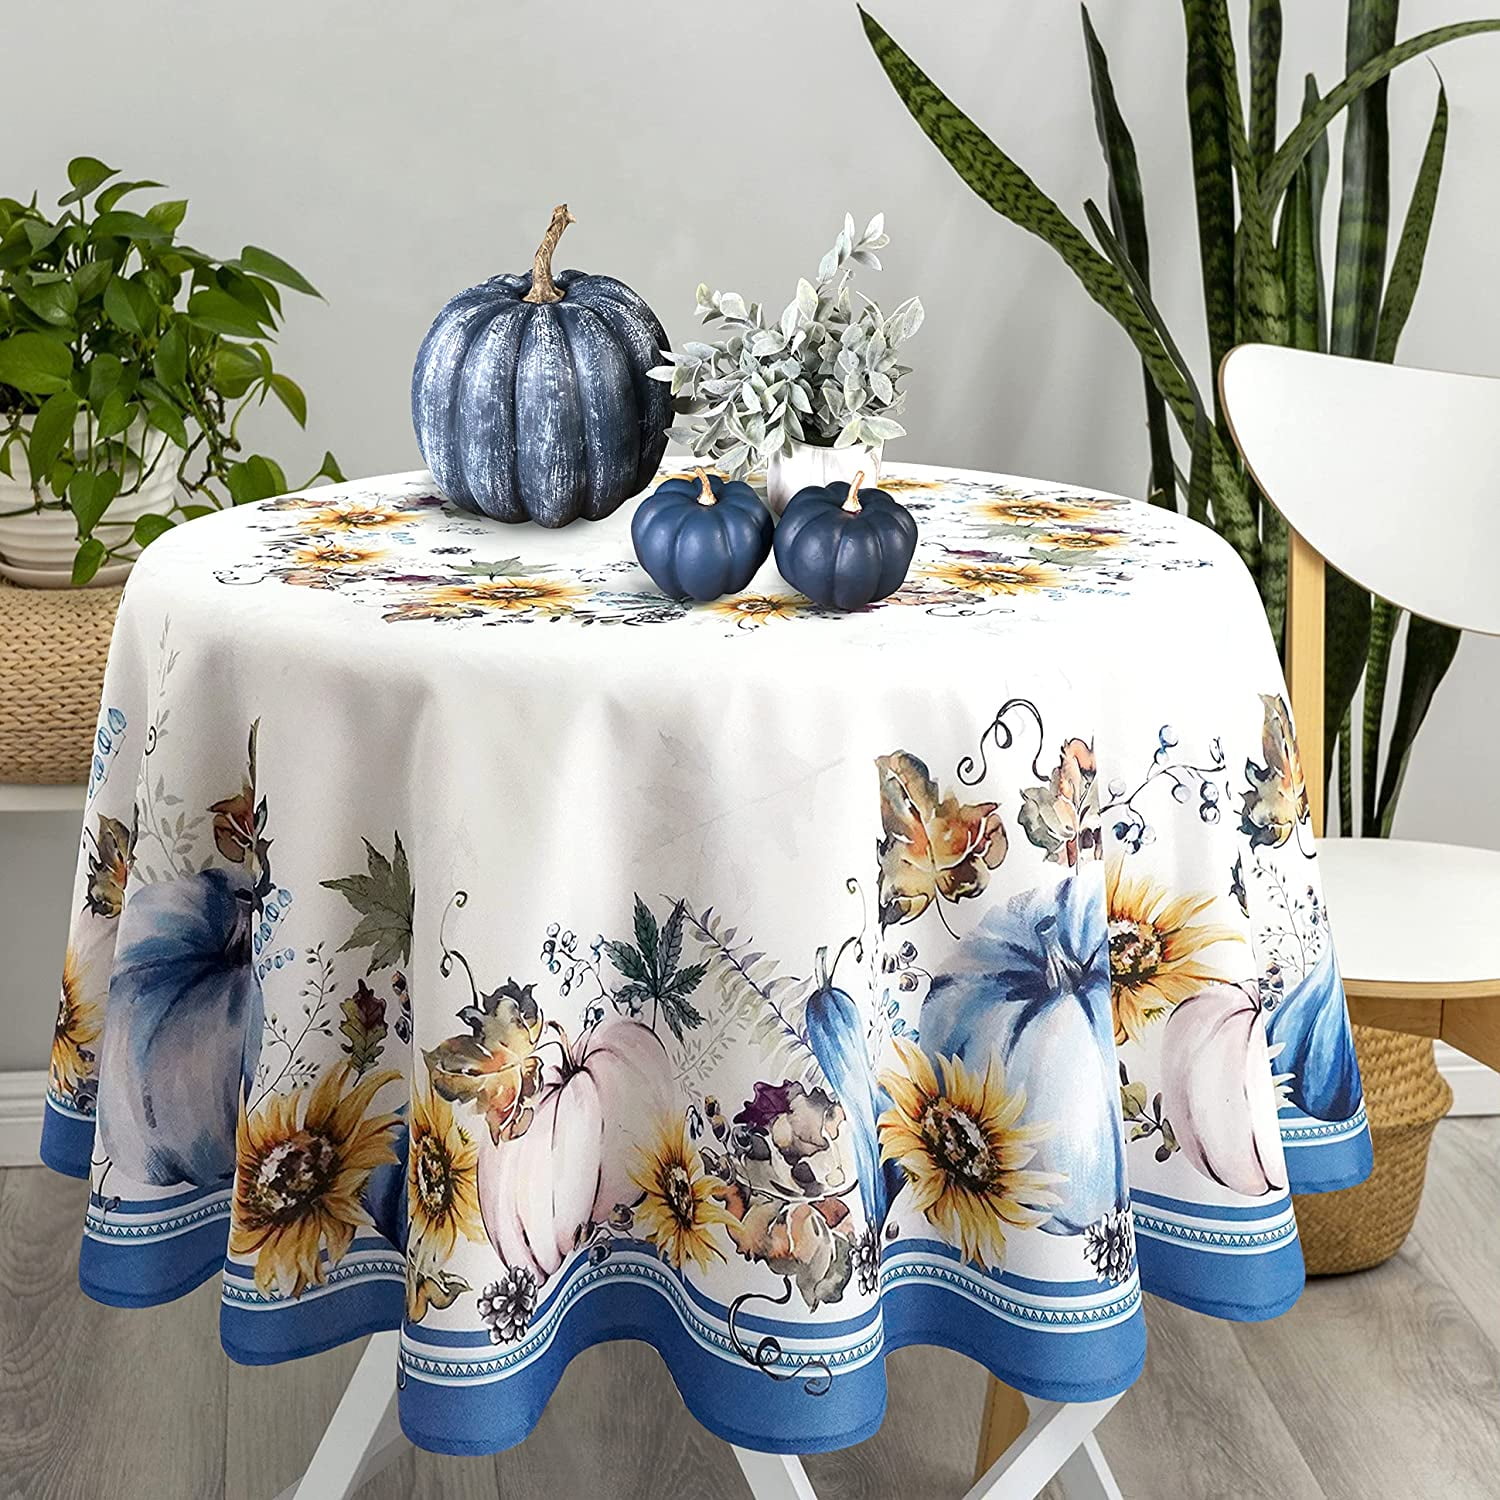 Hsvanyr Flower Dresser Top Protector Elegant Tablecloths Cover for Parties  Banquet 15inch by 68inch Anniversary Housewarming Gift with Tassel